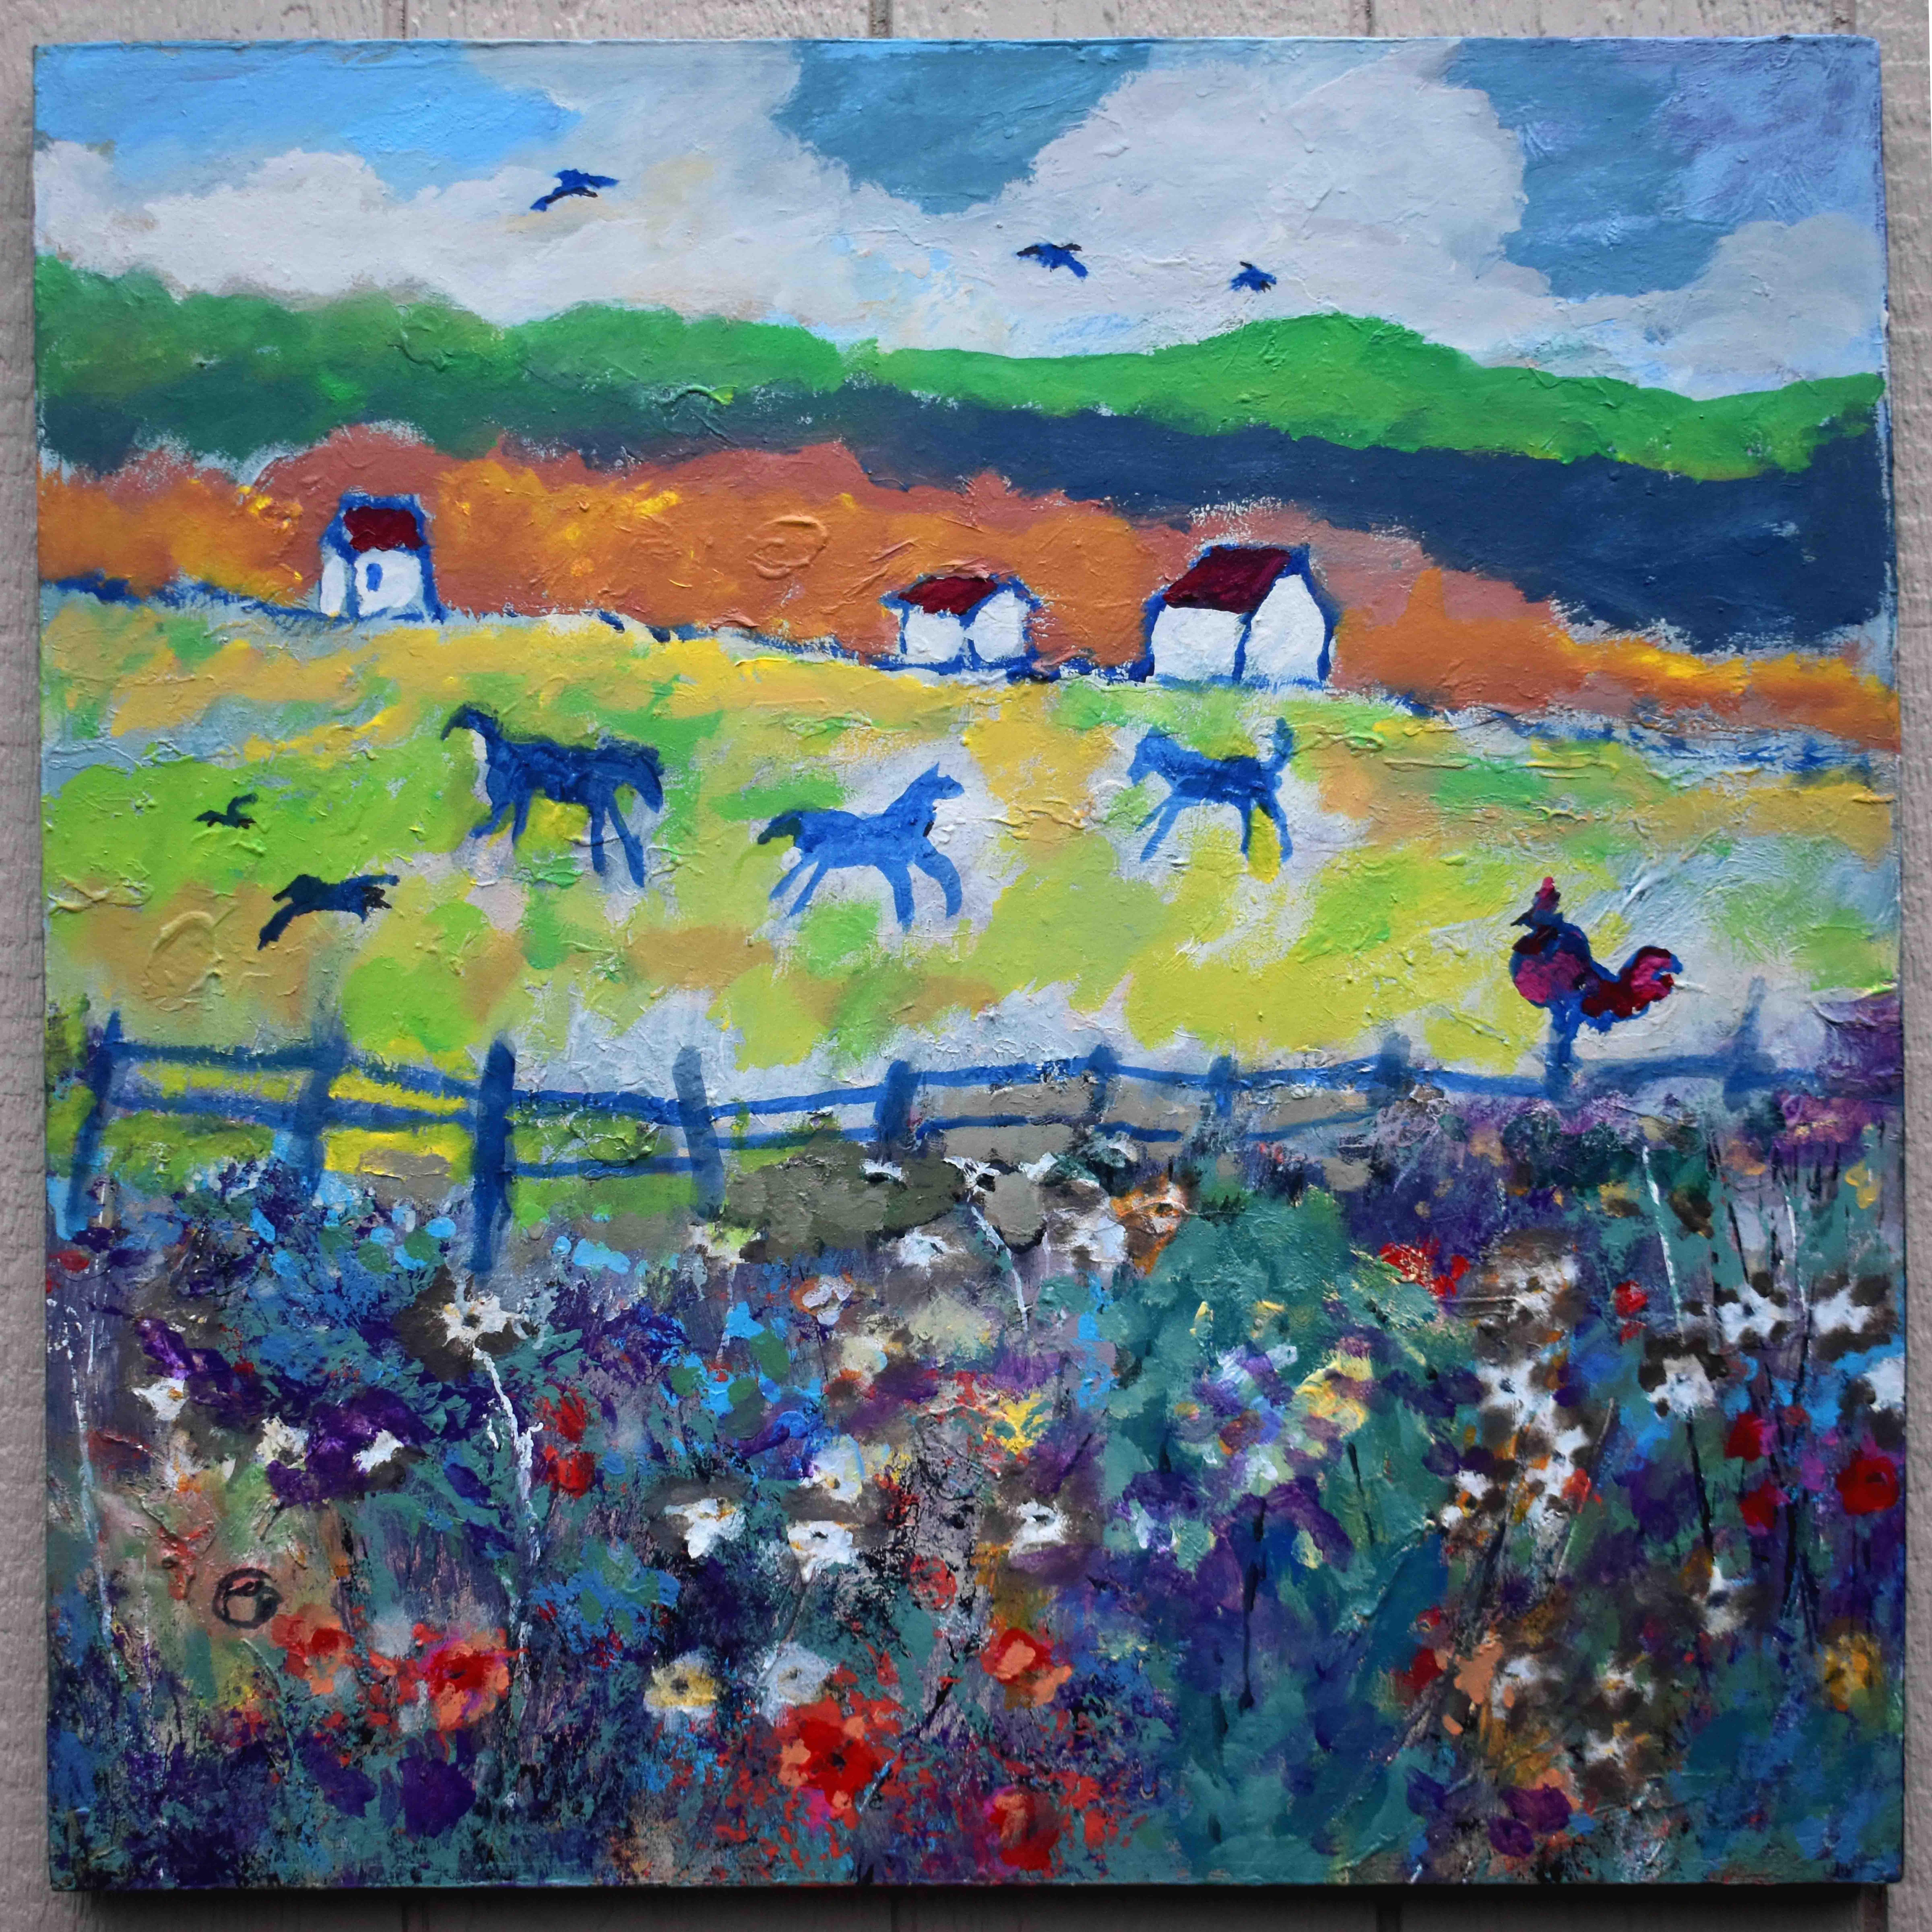 <p>Artist Comments<br>Artist Kip Decker presents a charming farmstead on a glorious day. Rustic cottages dot the hillside, as three horses gallop happily around the pasture. A rooster sits on the fence post watching the antics unfold. Kip renders